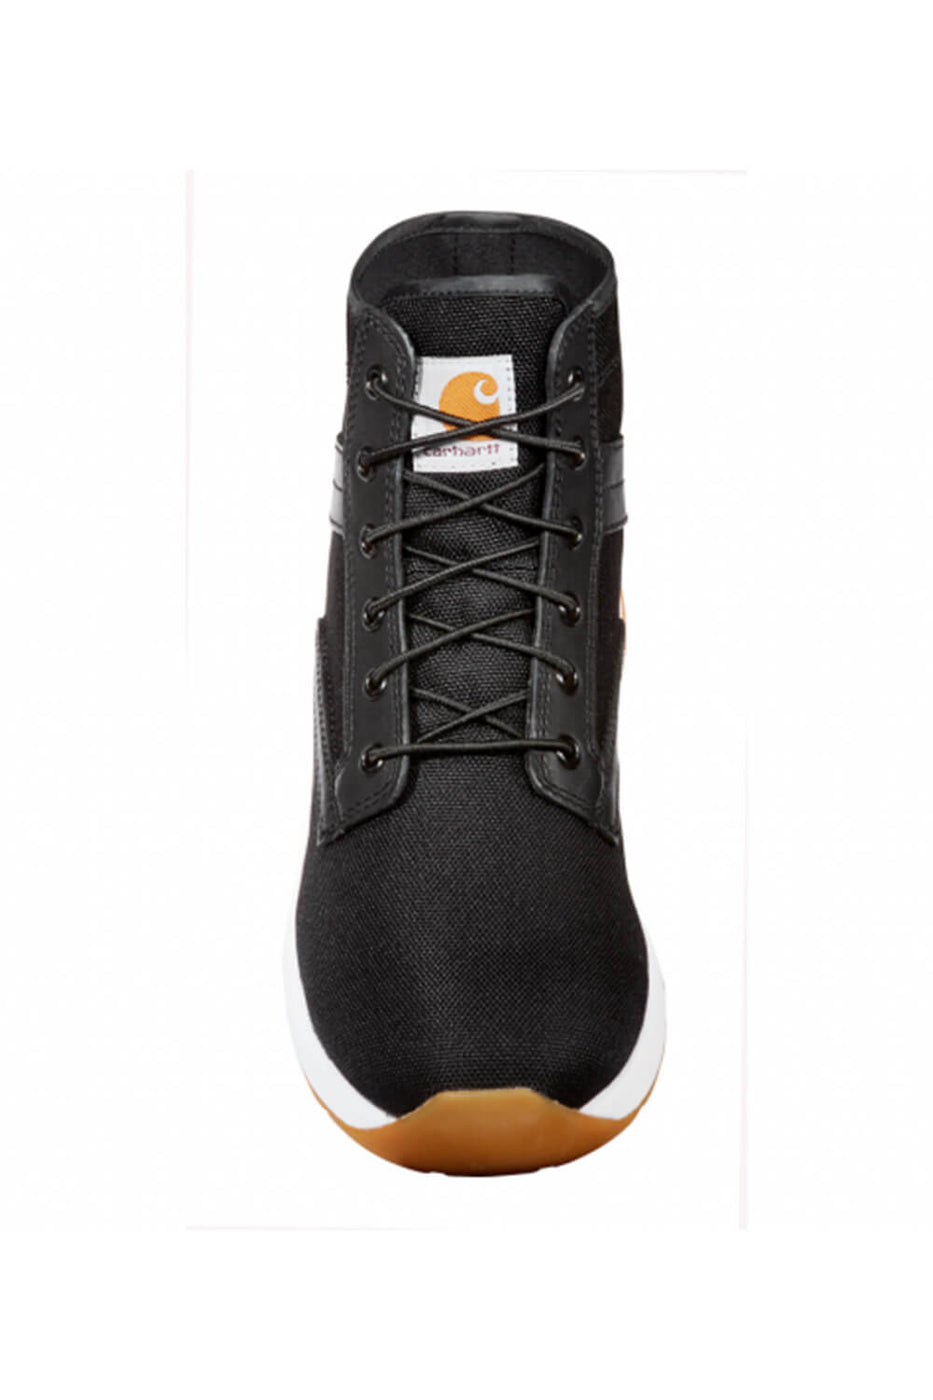 Update 214+ timberland sneaker boots latest